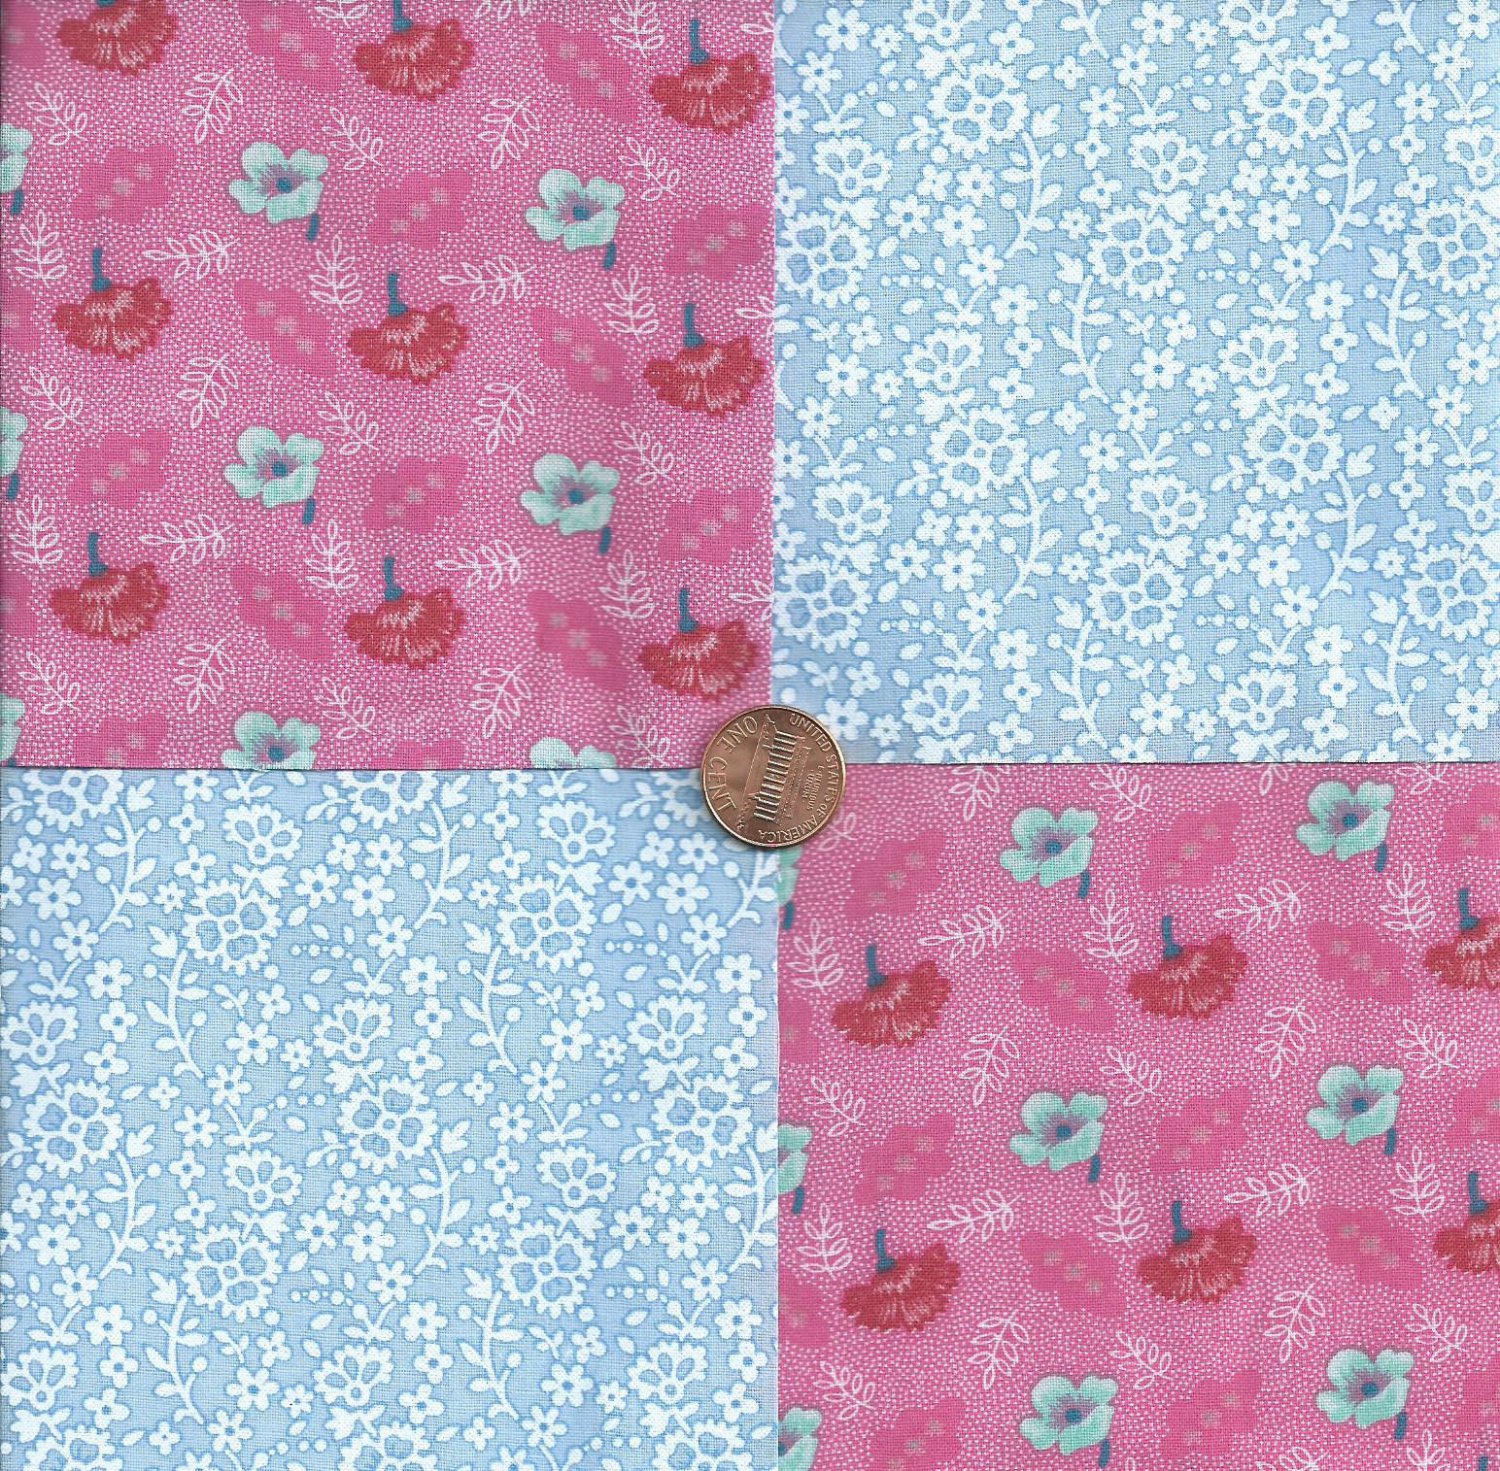 Blue and Pink Flowers 4 inch Cotton Fabric Craft Quilt Squares  Blocks wz1